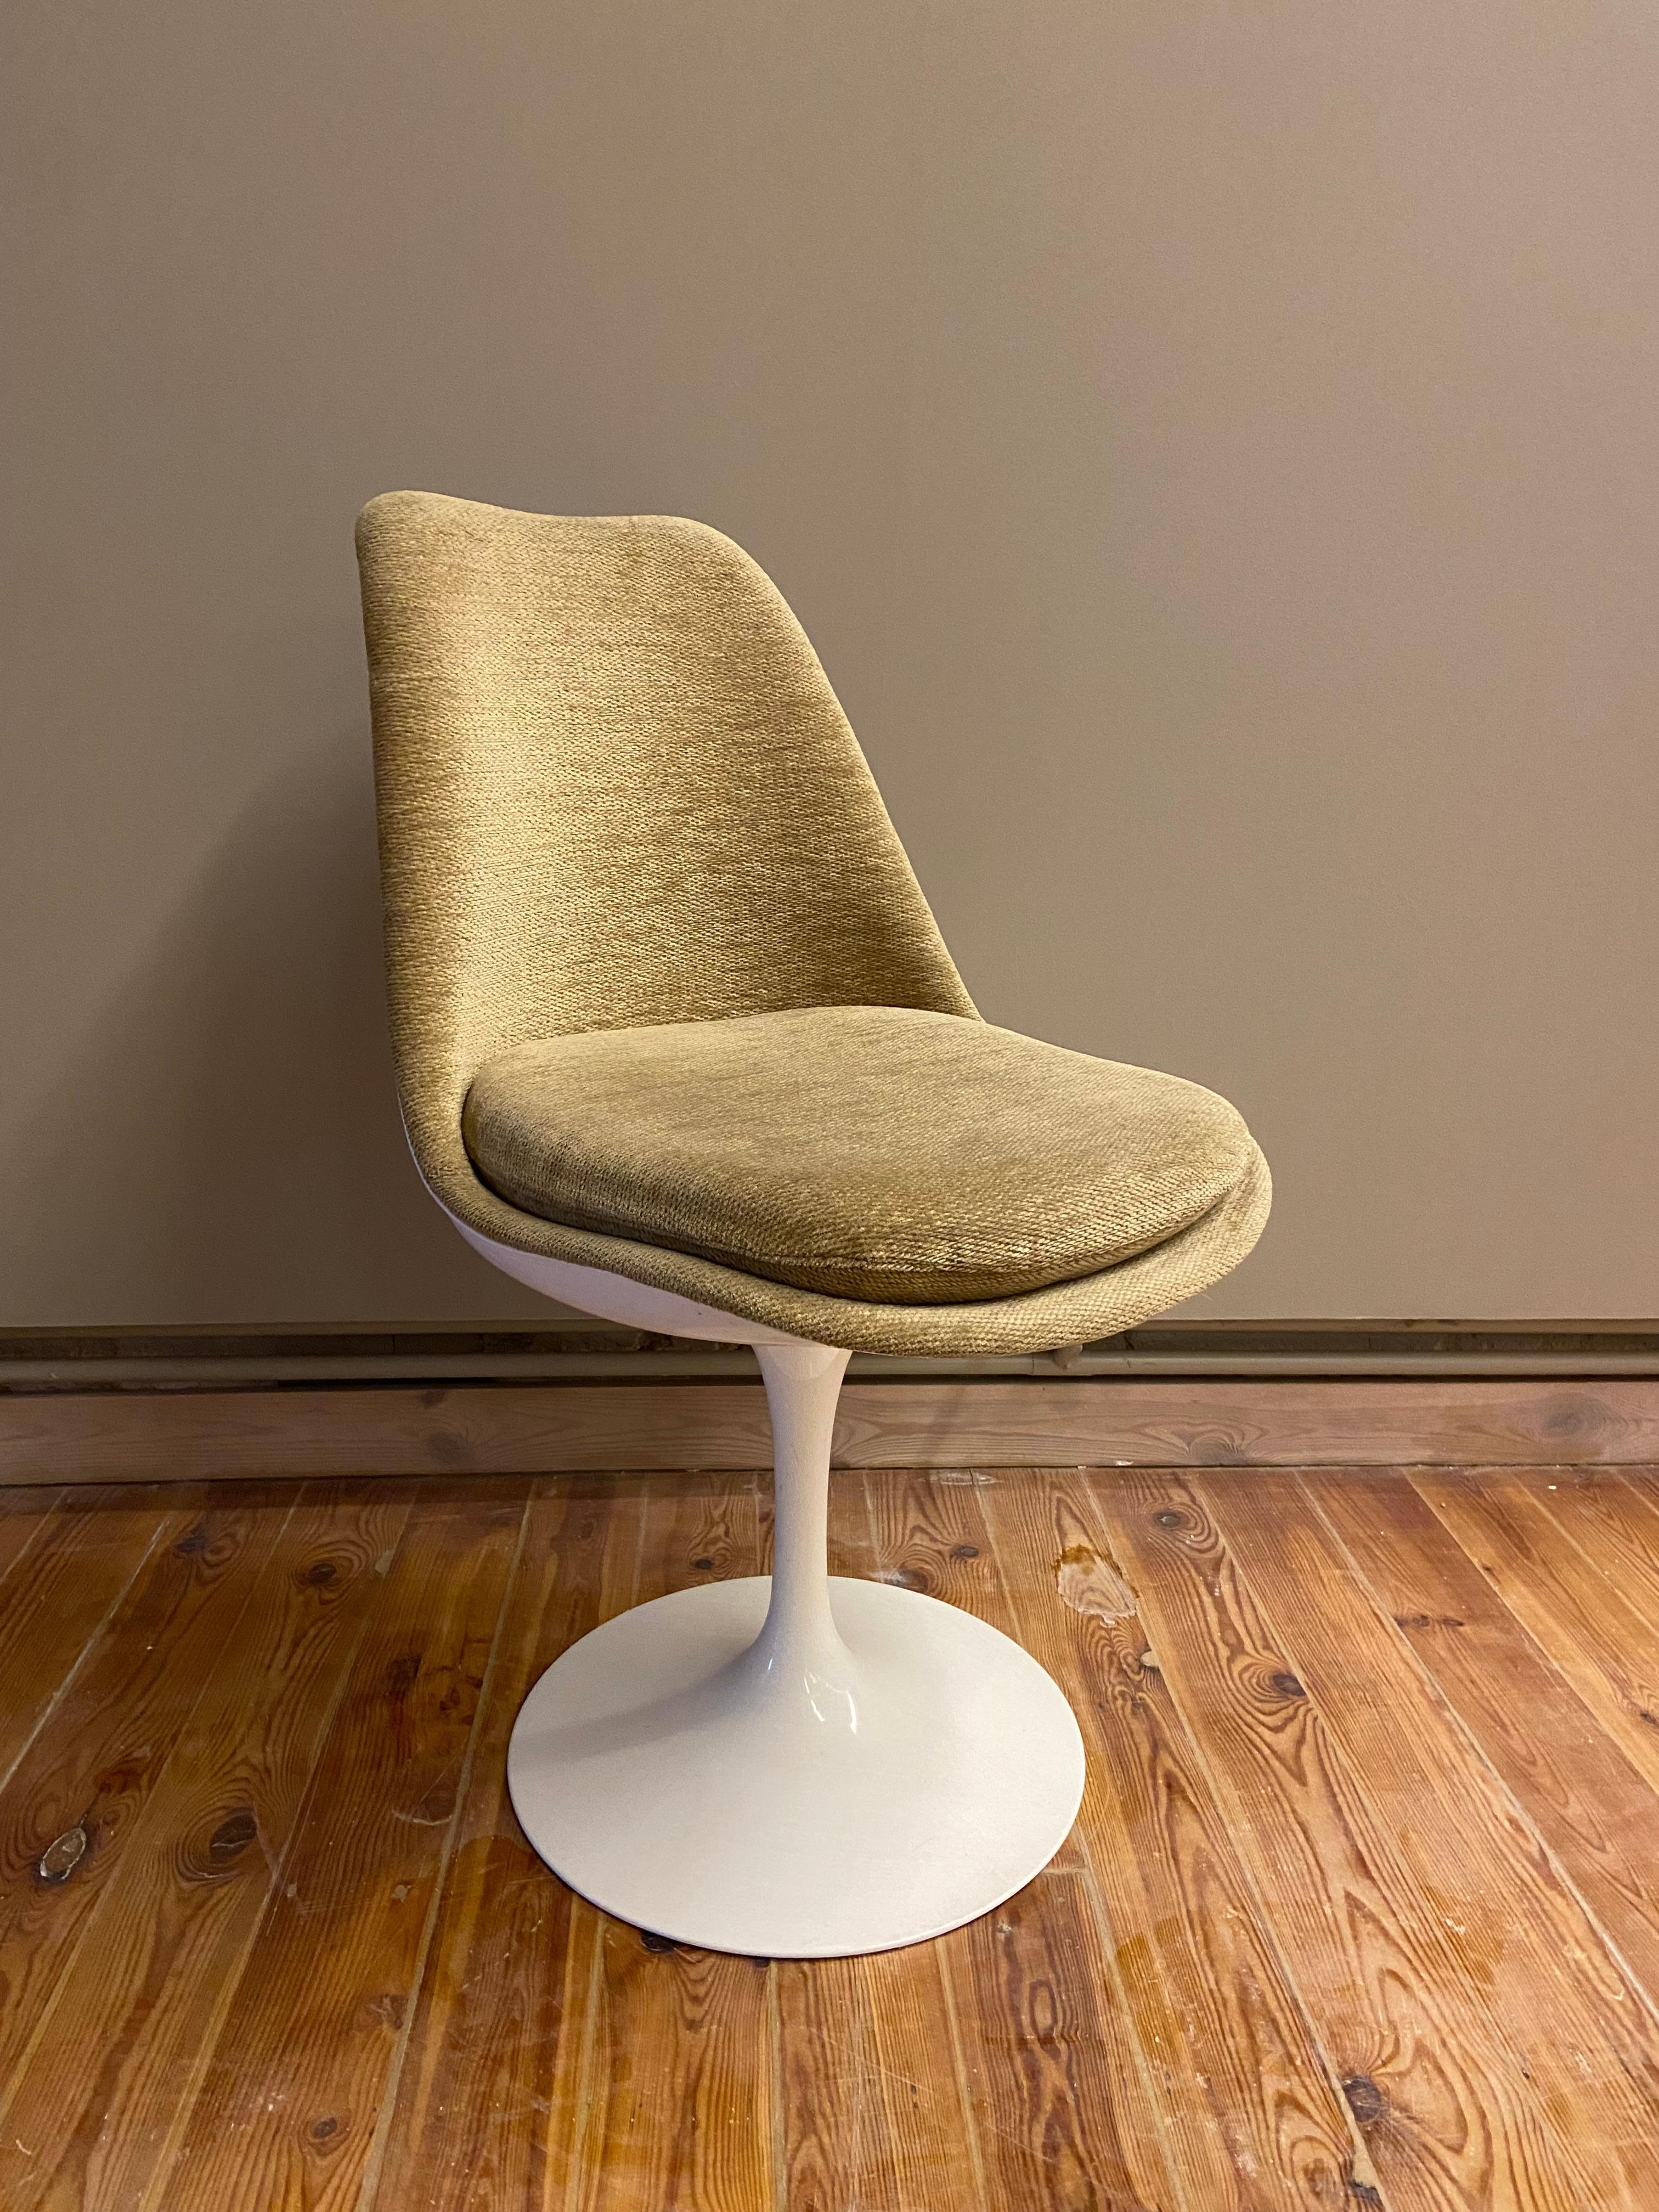 Extraordinary set of six “Tulip 151” model chairs designed by Eero Saarinen. Widely recognized model, a classic in the history of design. Simple structure, the seat itself is made of white fiberglass. The four classic legs have been eliminated to